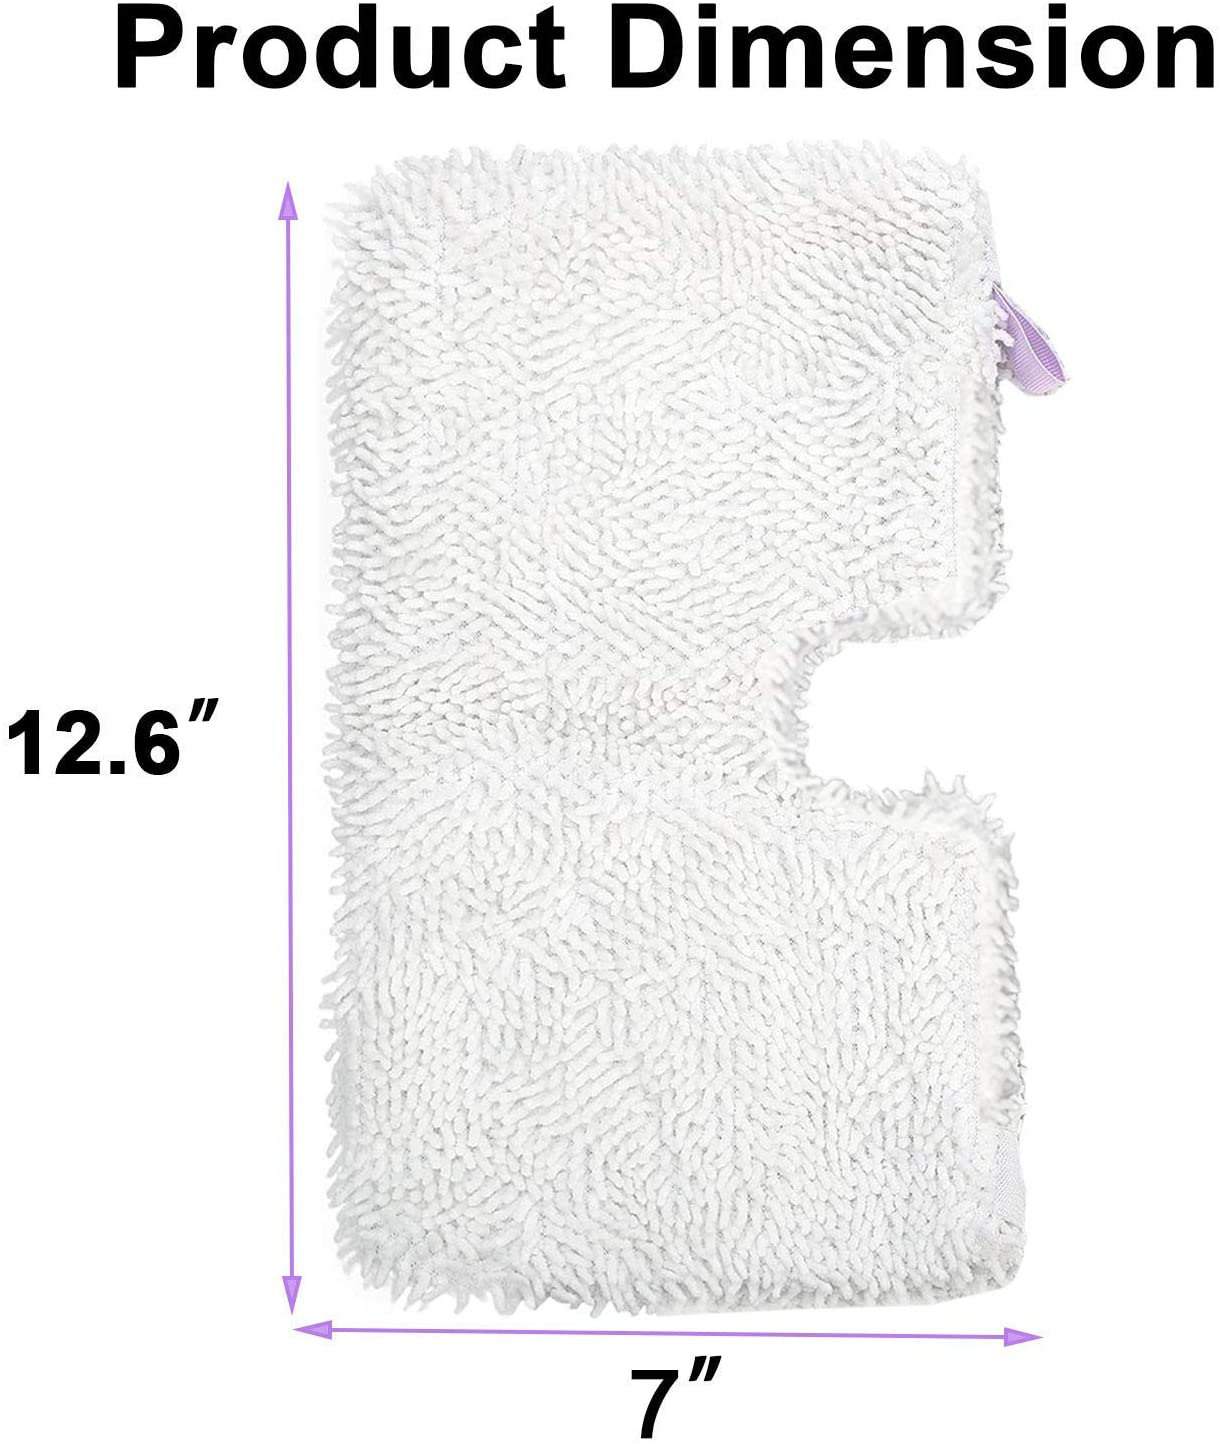 FFsign 6 Pack Replacement Washable Microfiber Steam Mop Pads for Shark Steam Pocket Mop Hard Floor Cleaner S3501 S3550 S3601 S3601D S3801 S3801CO S3901 SE450 S2901 S2902, 6 Pcs Cleaning Steamer Pad